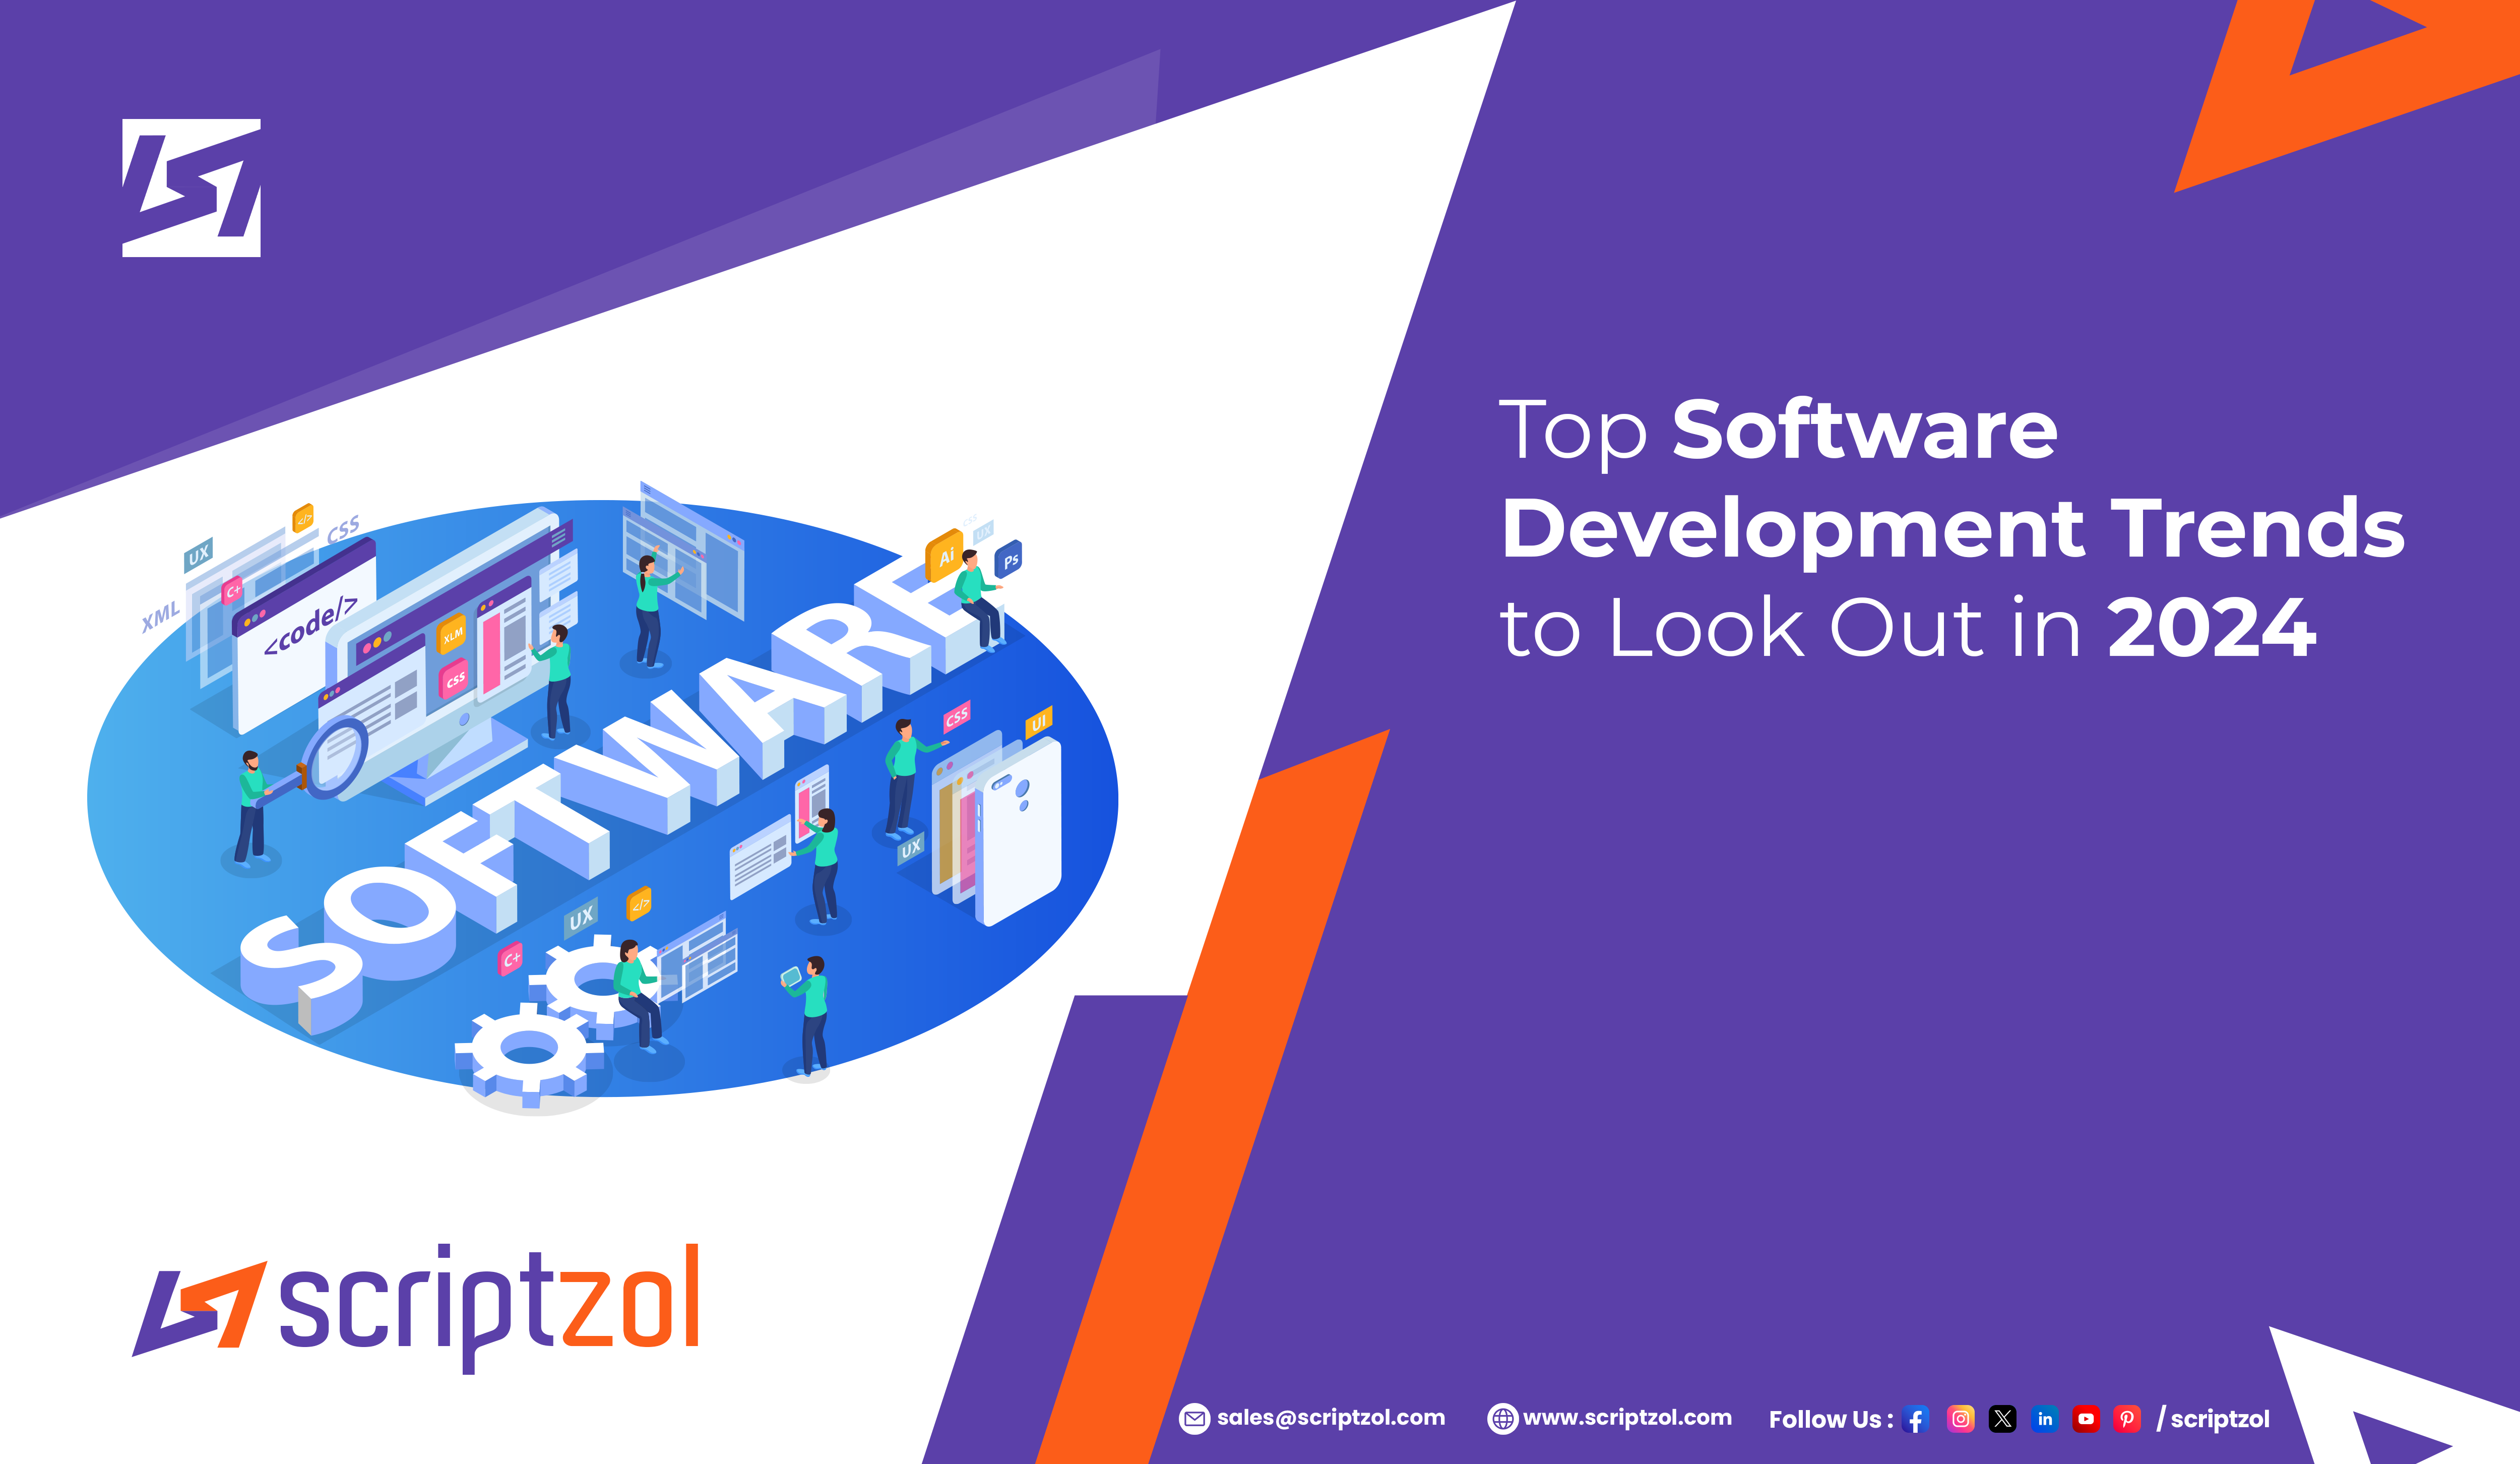 Top Software Development Trends to Look Out in 2024